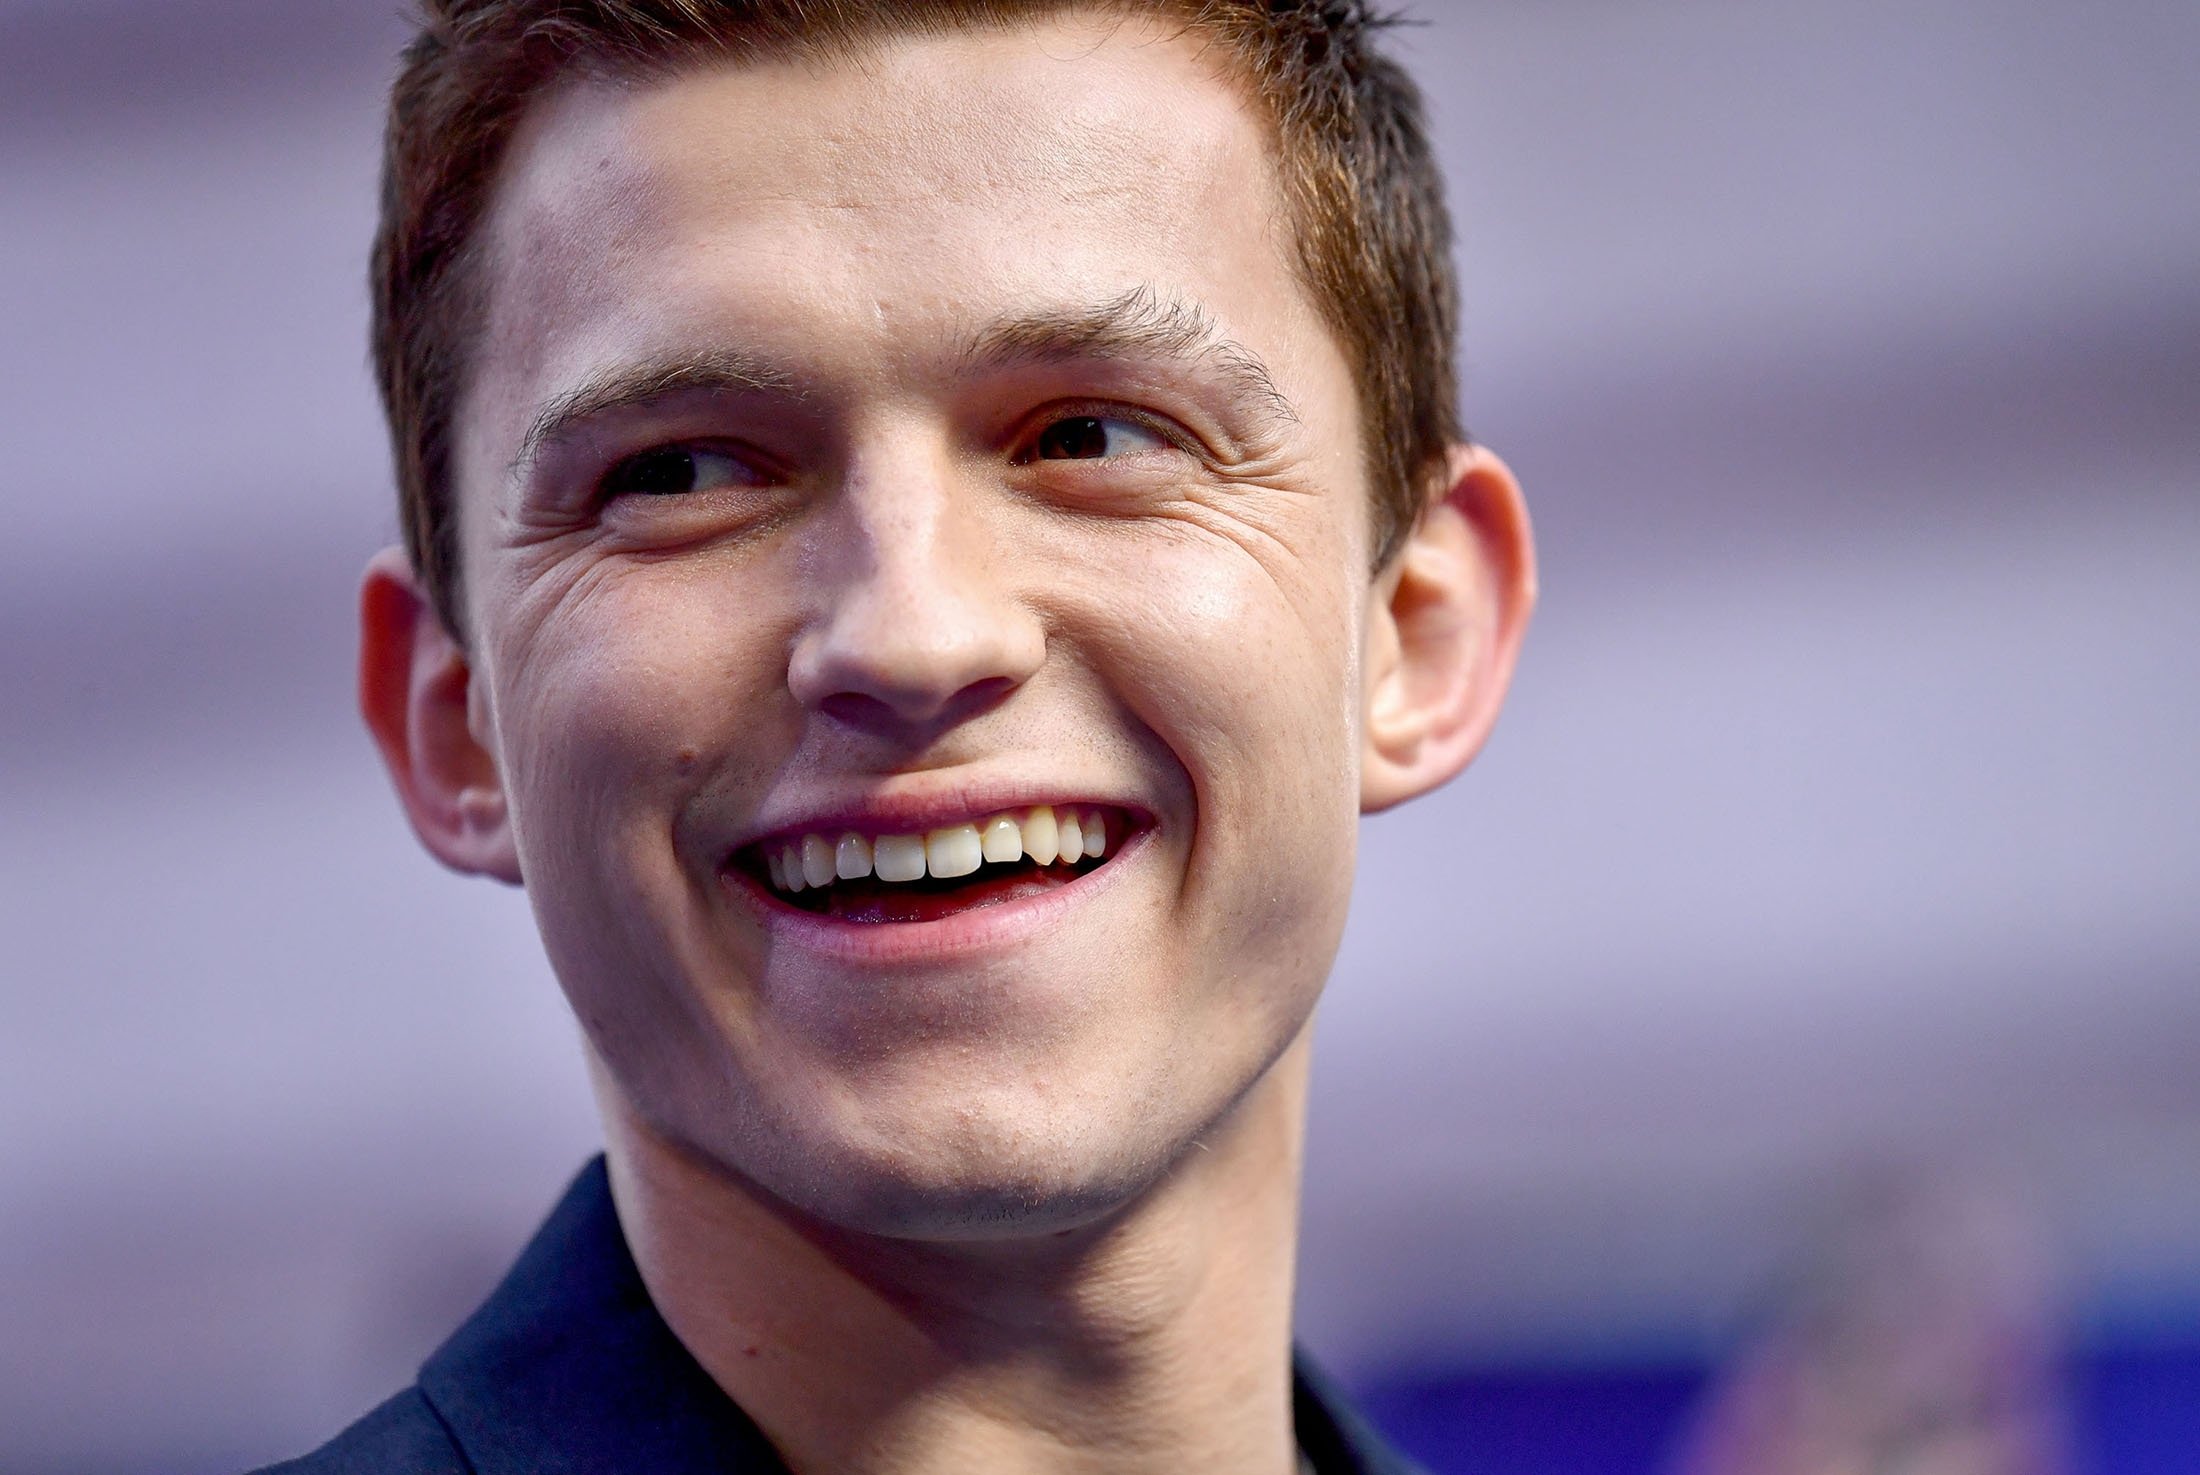 Tom Holland attends the U.K. Premiere of Disney And Pixar's 'Onward' at The Curzon Mayfair in London, U.K., Feb. 23, 2020. (Getty Images)